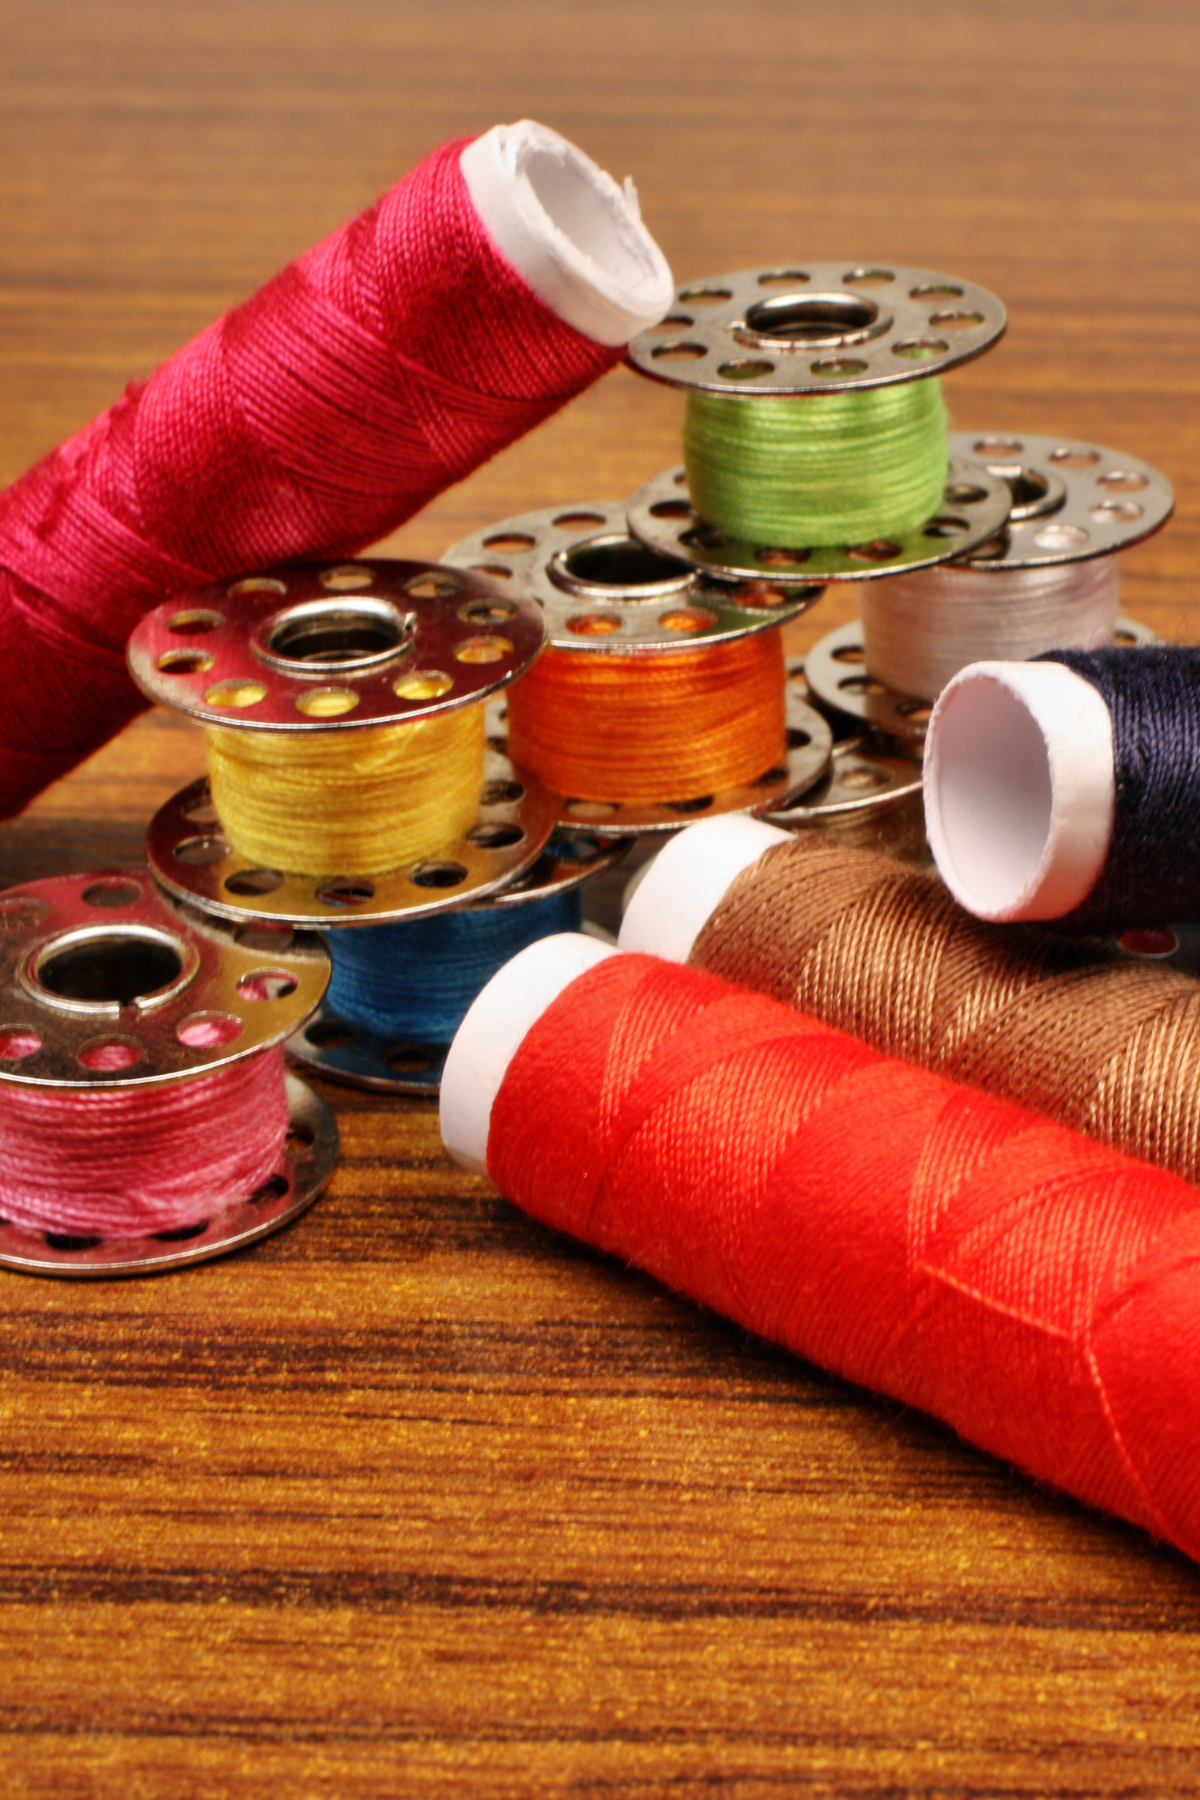 Image shows different types of threads, for machine sewing and hand sewing, in different colors and sizes.